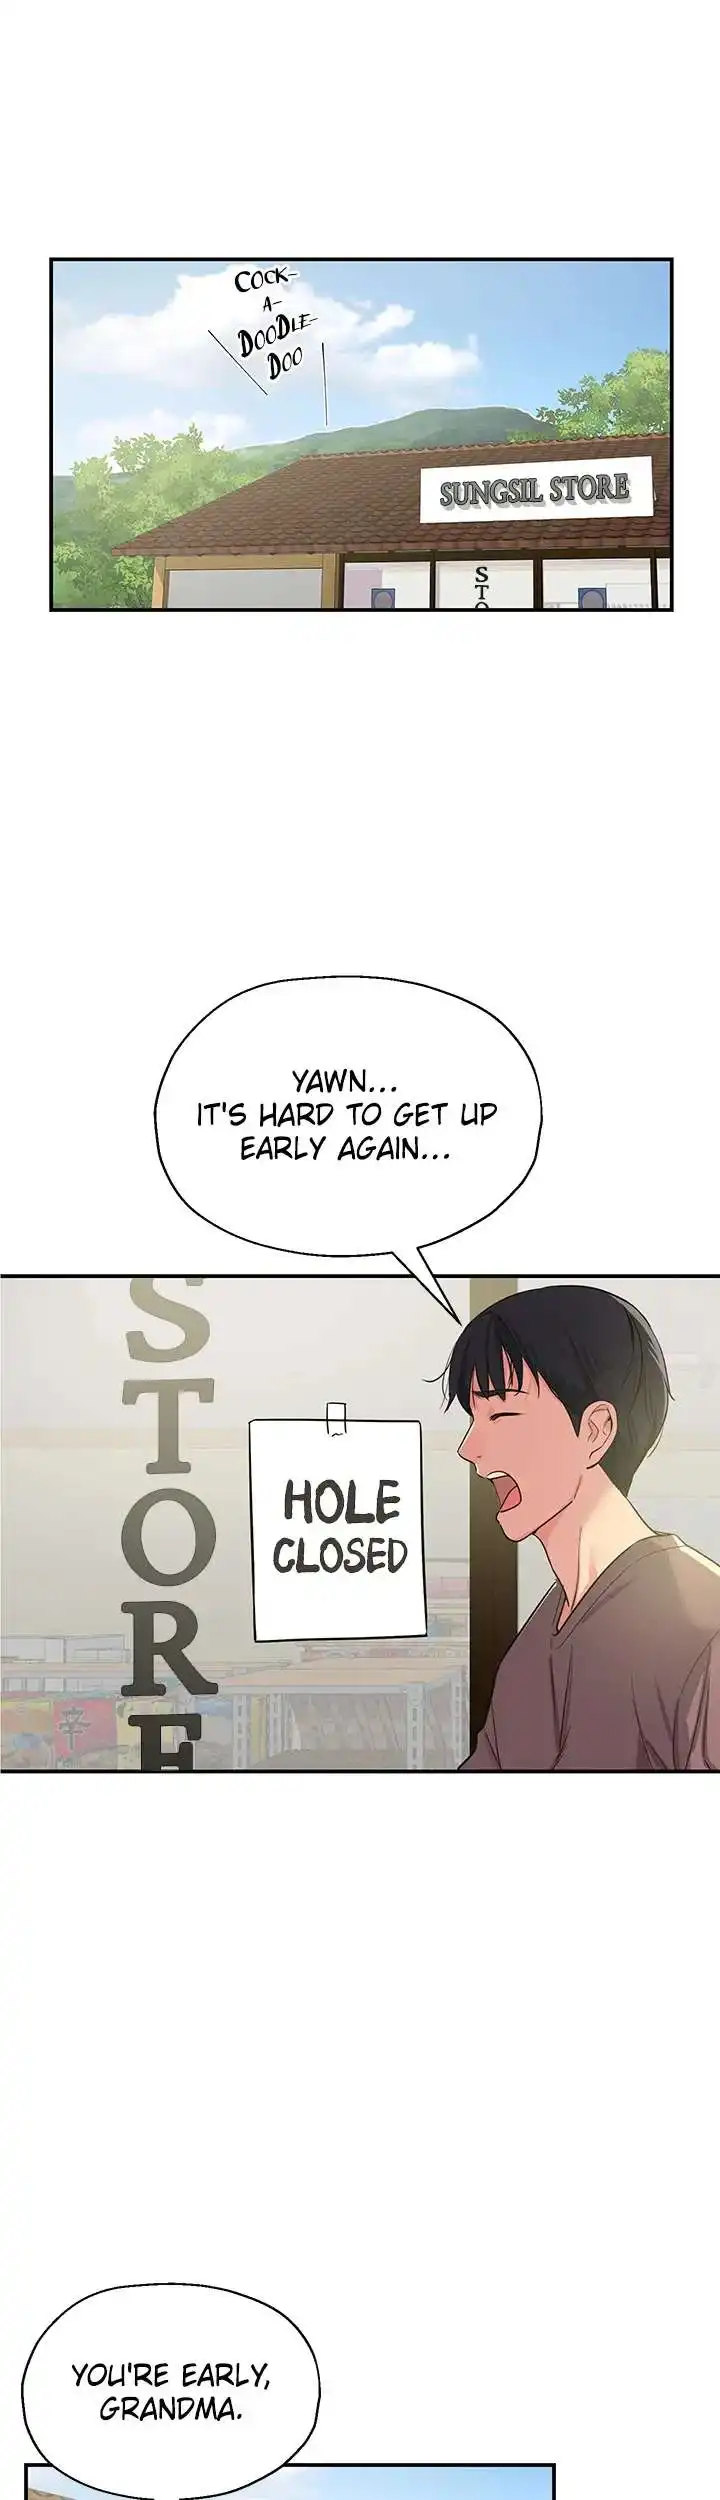 The Hole is Open - Chapter 1 - 51